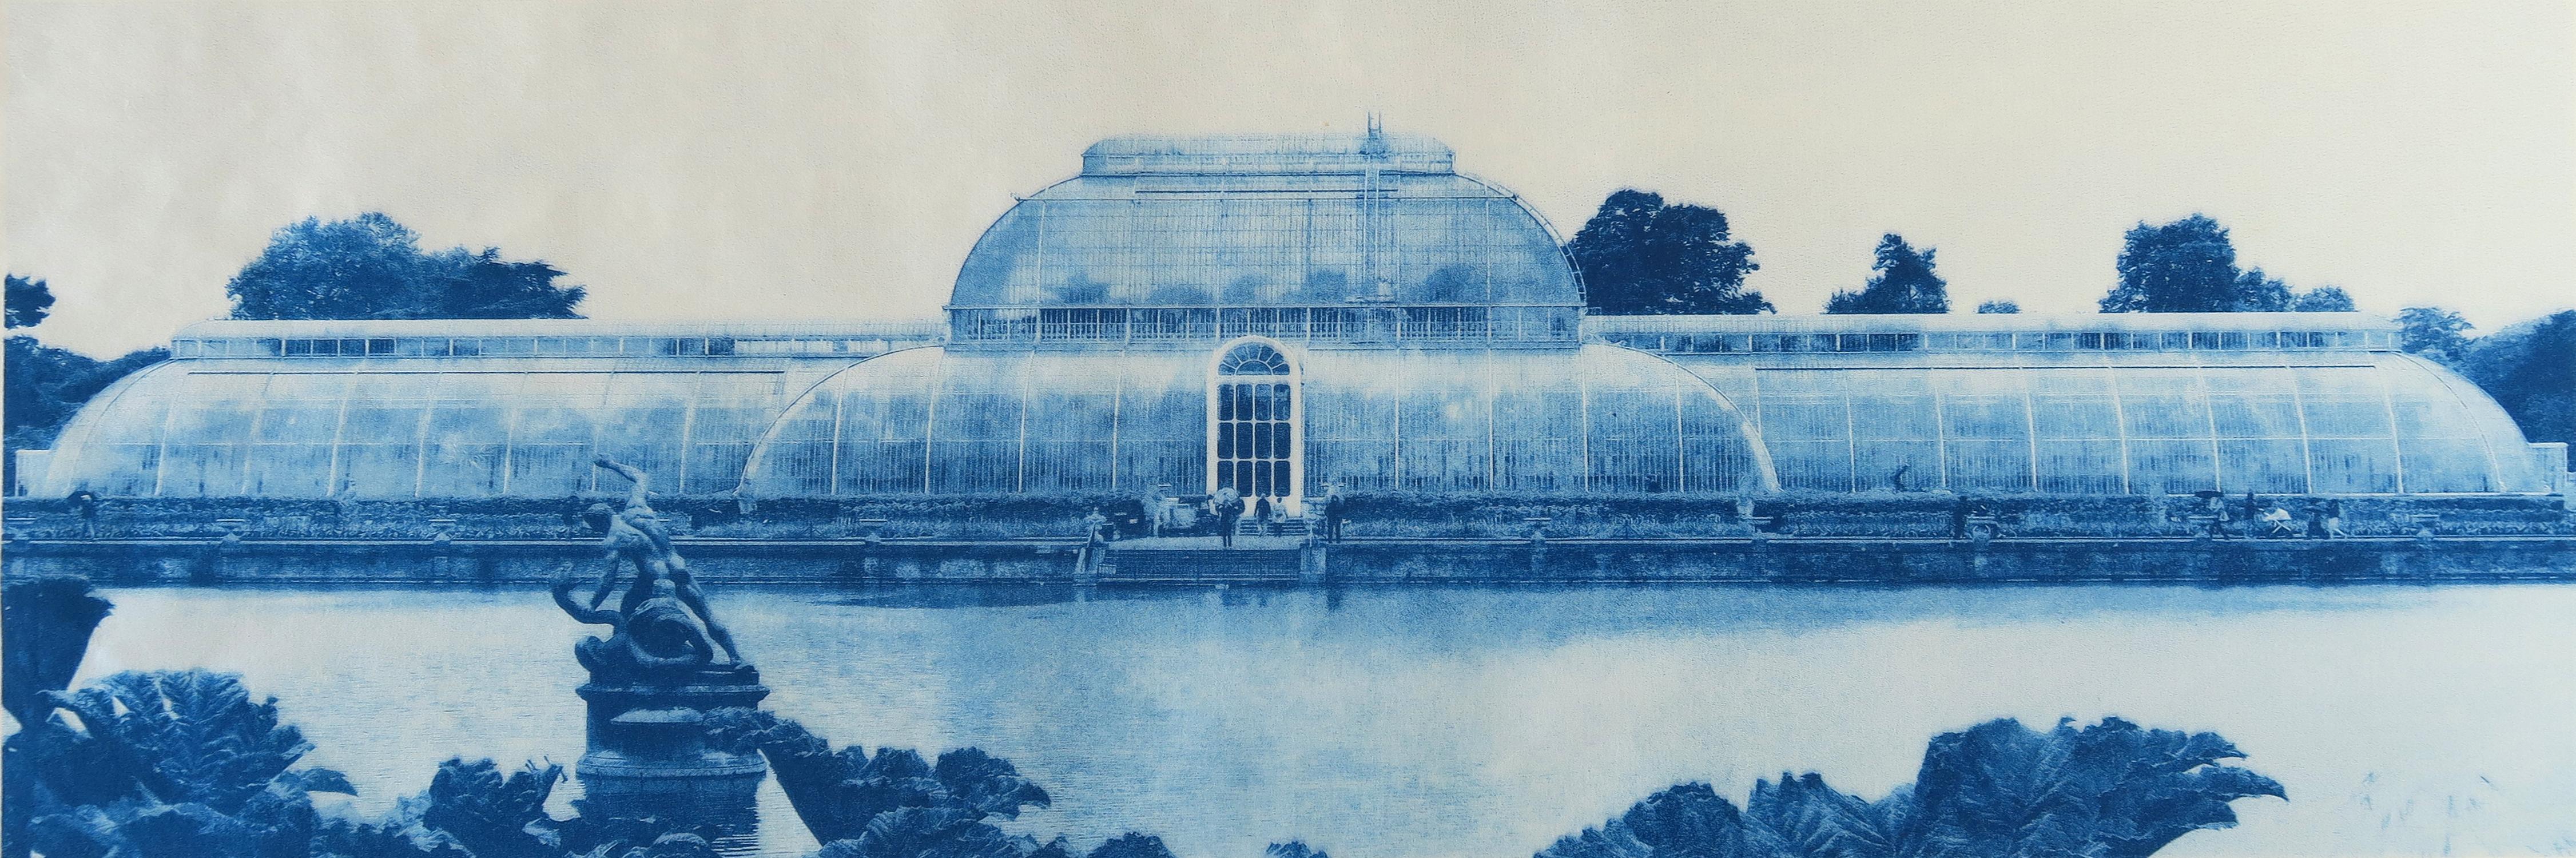 Penelope Stewart Landscape Photograph - Paradise at Kew Gardens, hand printed photo lithography on Japanese paper 2018, 